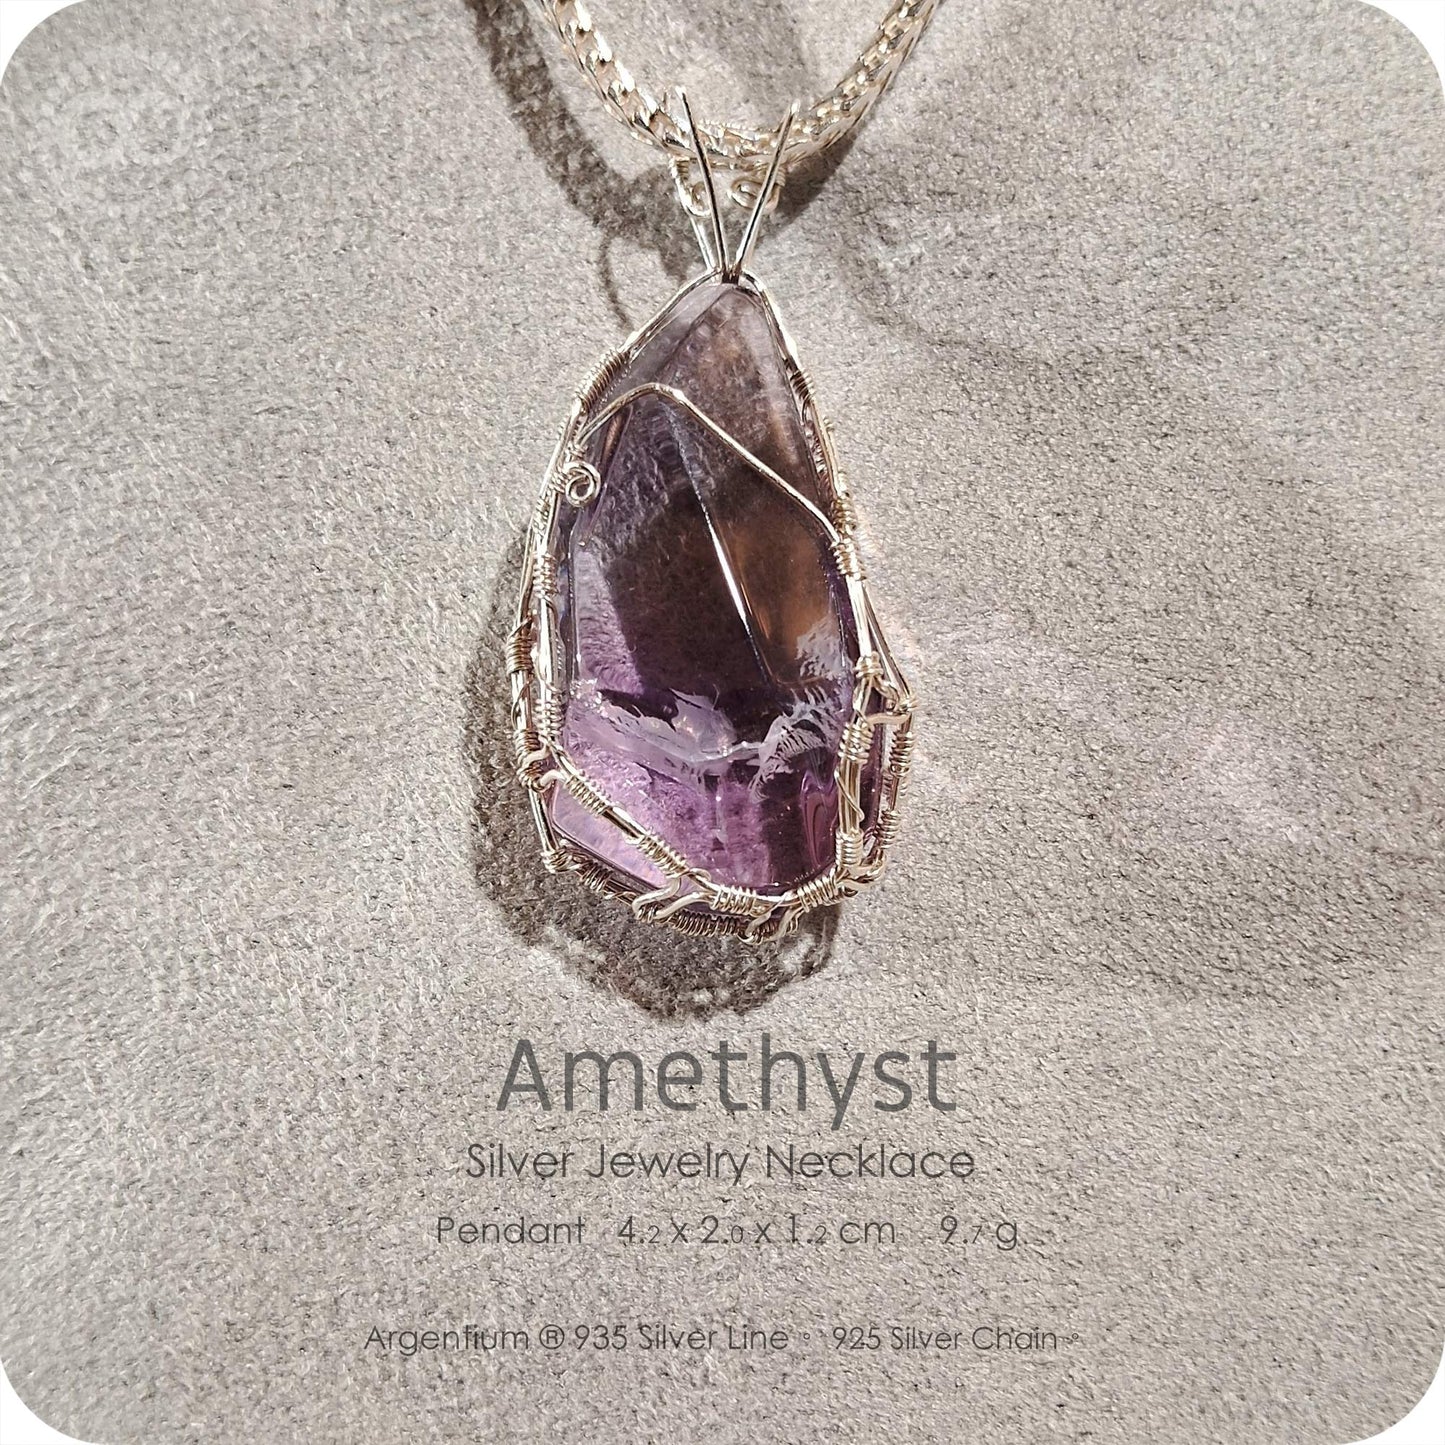 Amethyst Silver Jewelry Necklace - H233